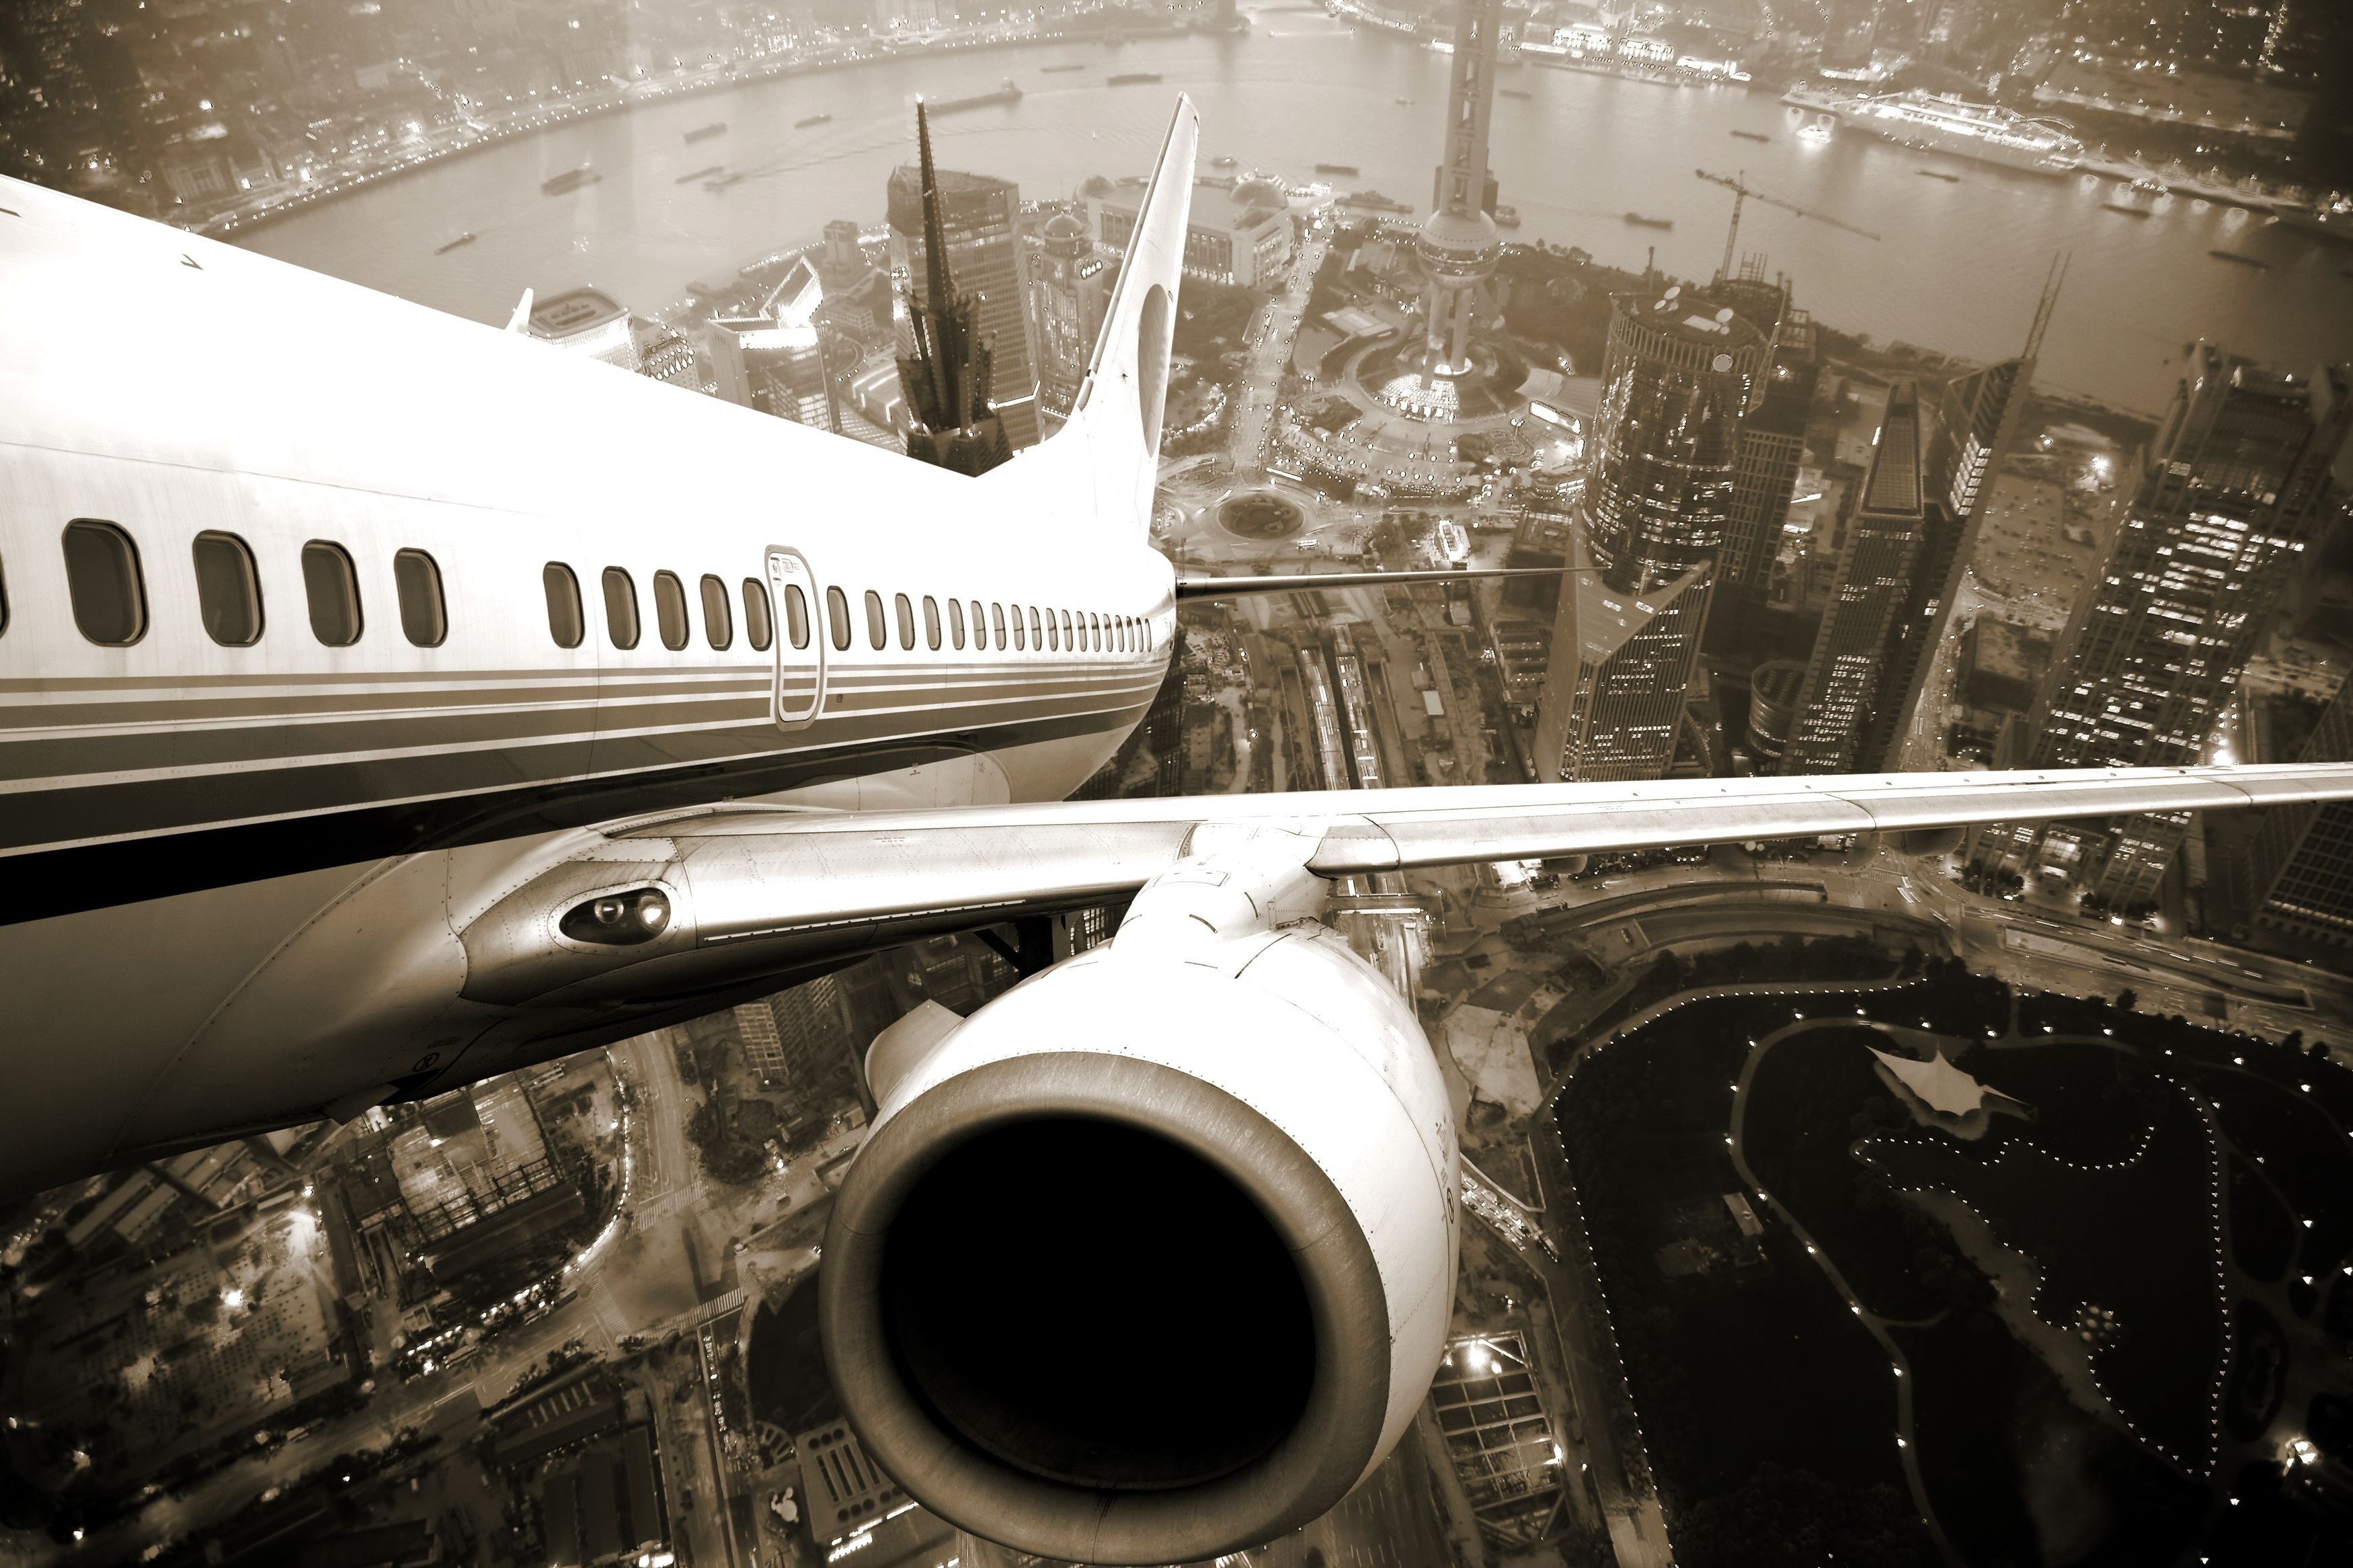 General 3500x2333 flying aircraft sepia aerial view cityscape city airplane vehicle passenger aircraft